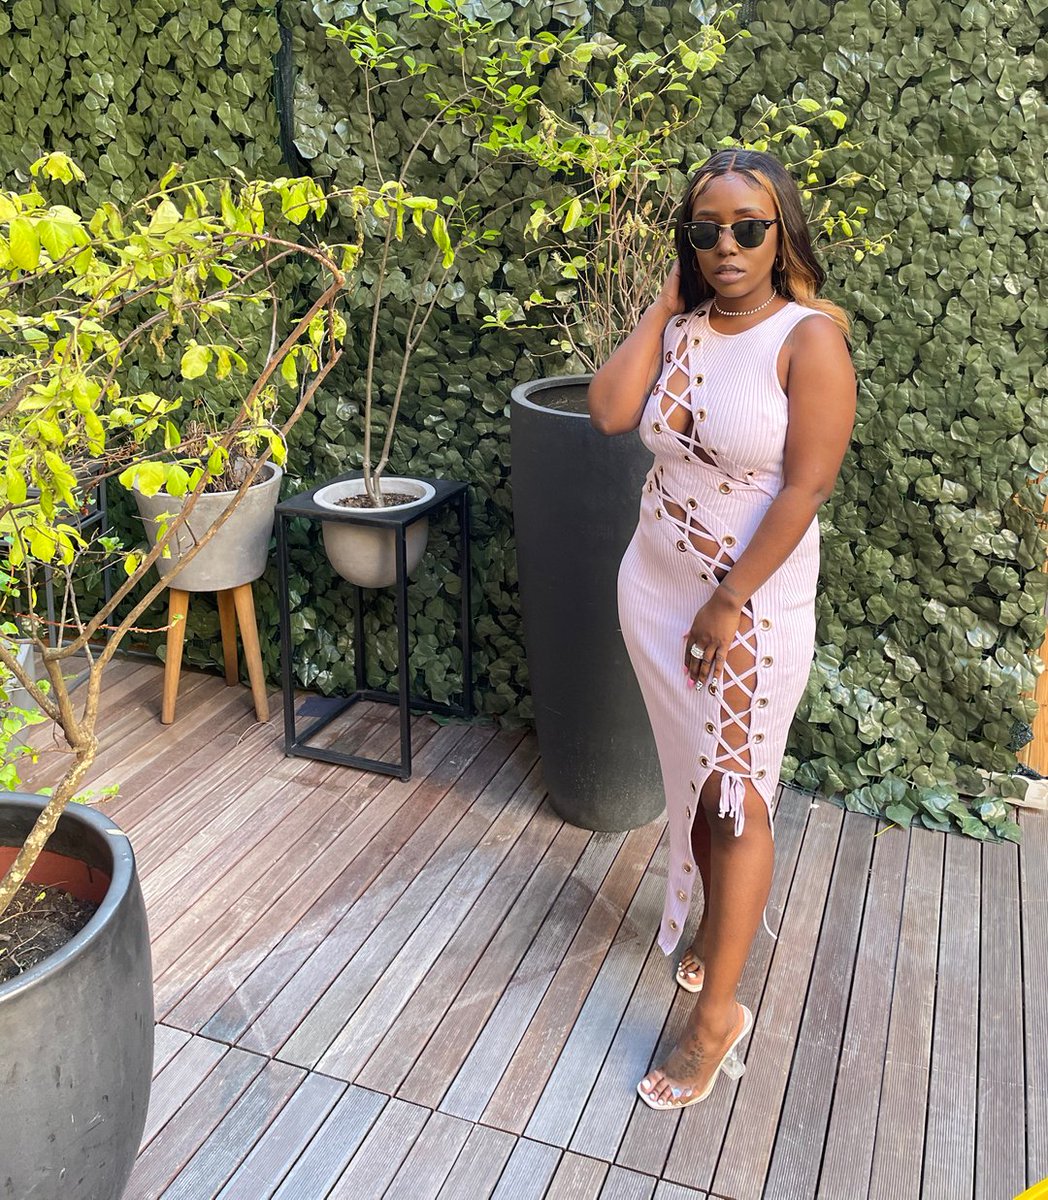 Be anything but predictable, be Potent!

Style Featured: the Peek A Boo Dress

.⁣
.⁣
.⁣
.⁣
.⁣
#outfitinspiration #fashionblogger #outfitoftheday #outfittrends #fallfashion #onlineboutique #instagramboutique #shoplocal #clothingboutique #boutiquefashion #onlineboutiq